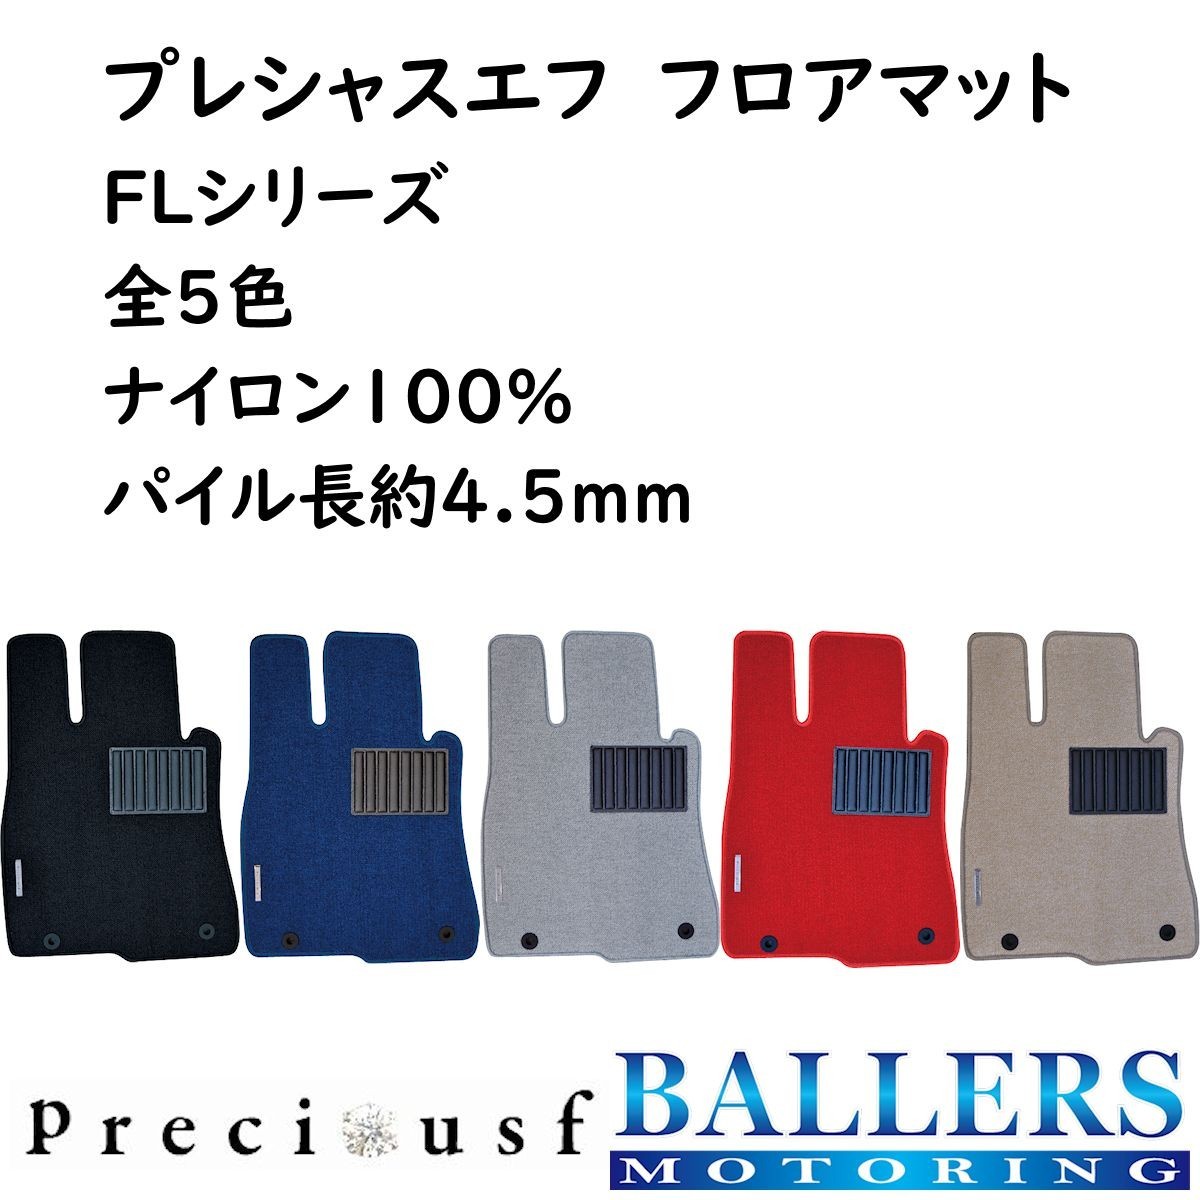  Peugeot 407 407SW 2005/6~ floor mat FL series Precious ef custom-made made in Japan build-to-order manufacturing 3 pieces set Preciousf Peugeot